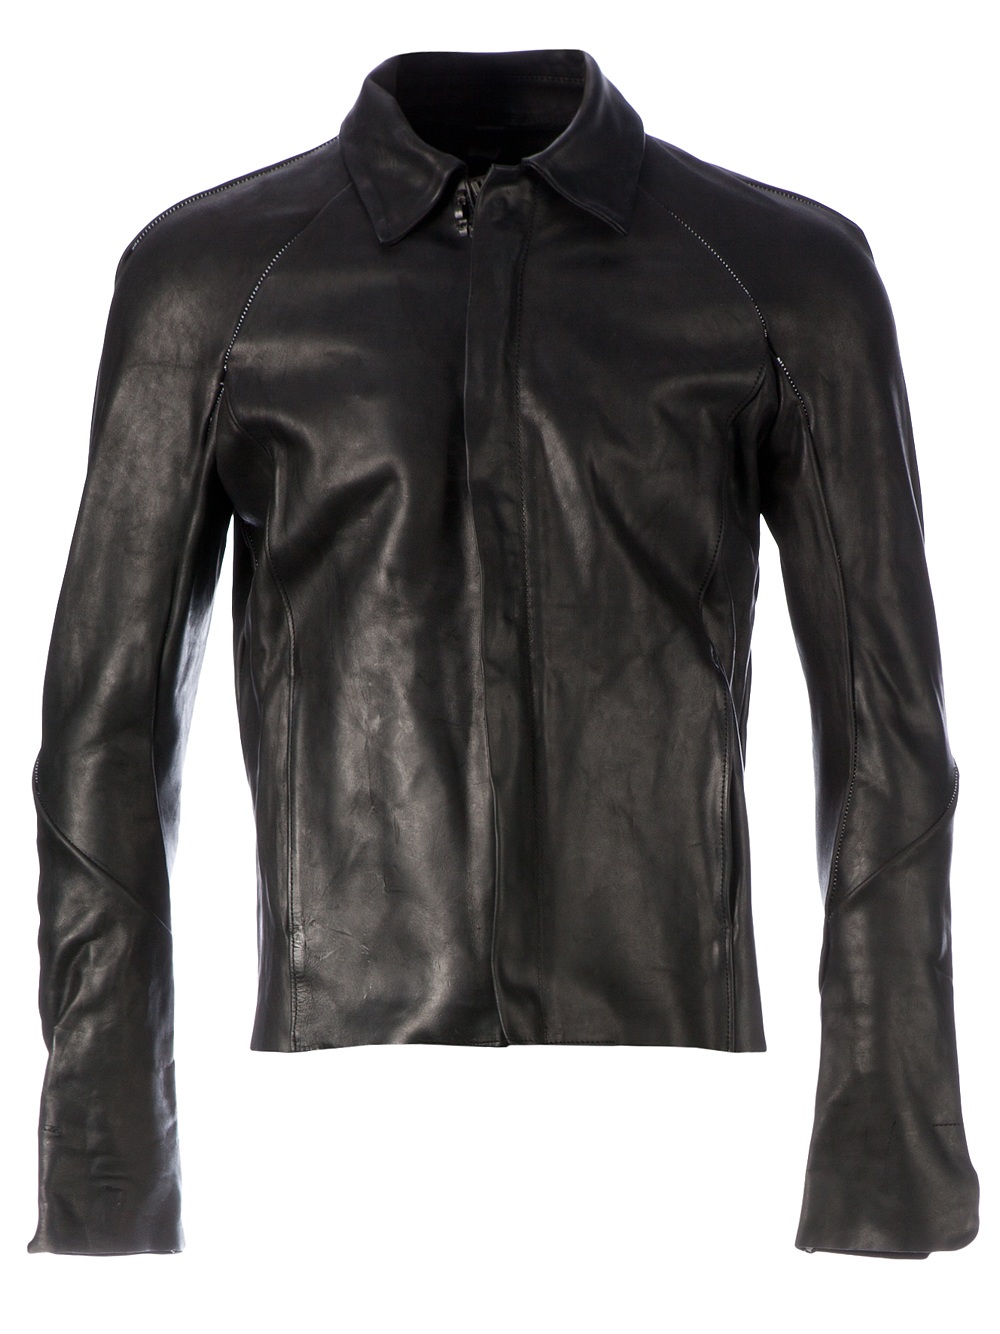 Incarnation Classic Horse Leather Jacket in Black for Men | Lyst